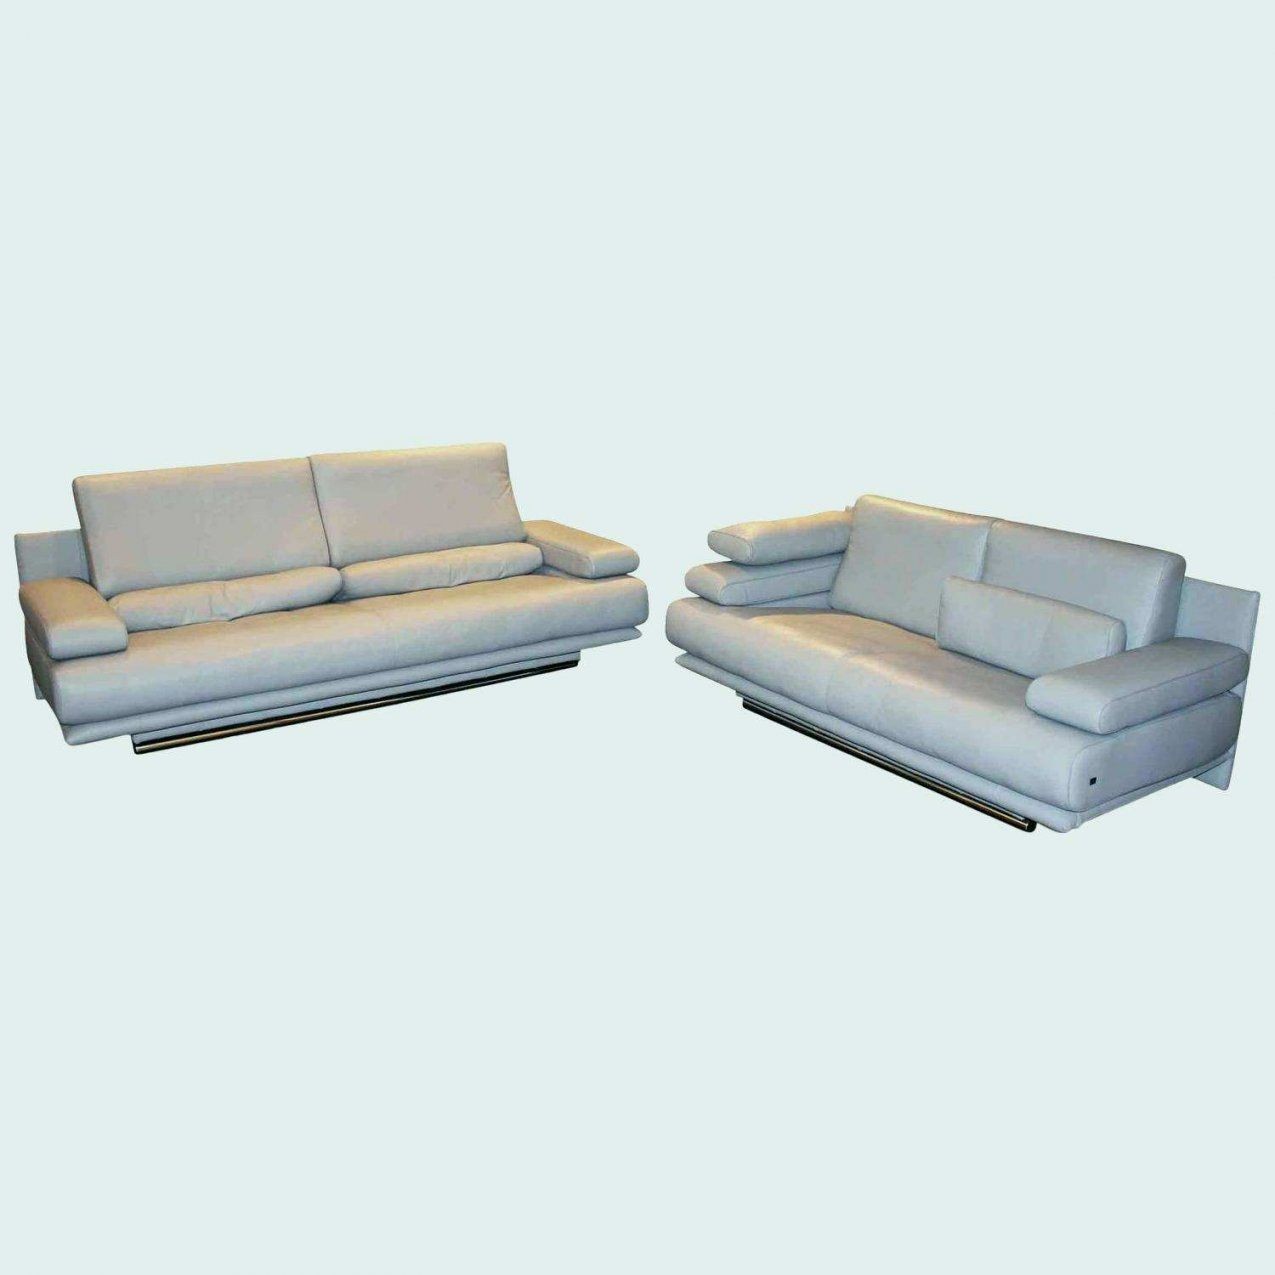 Seats And Sofas Oberhausen Best Of Seats And Sofas Bochum Cheap von Seat And Sofas Bochum Photo